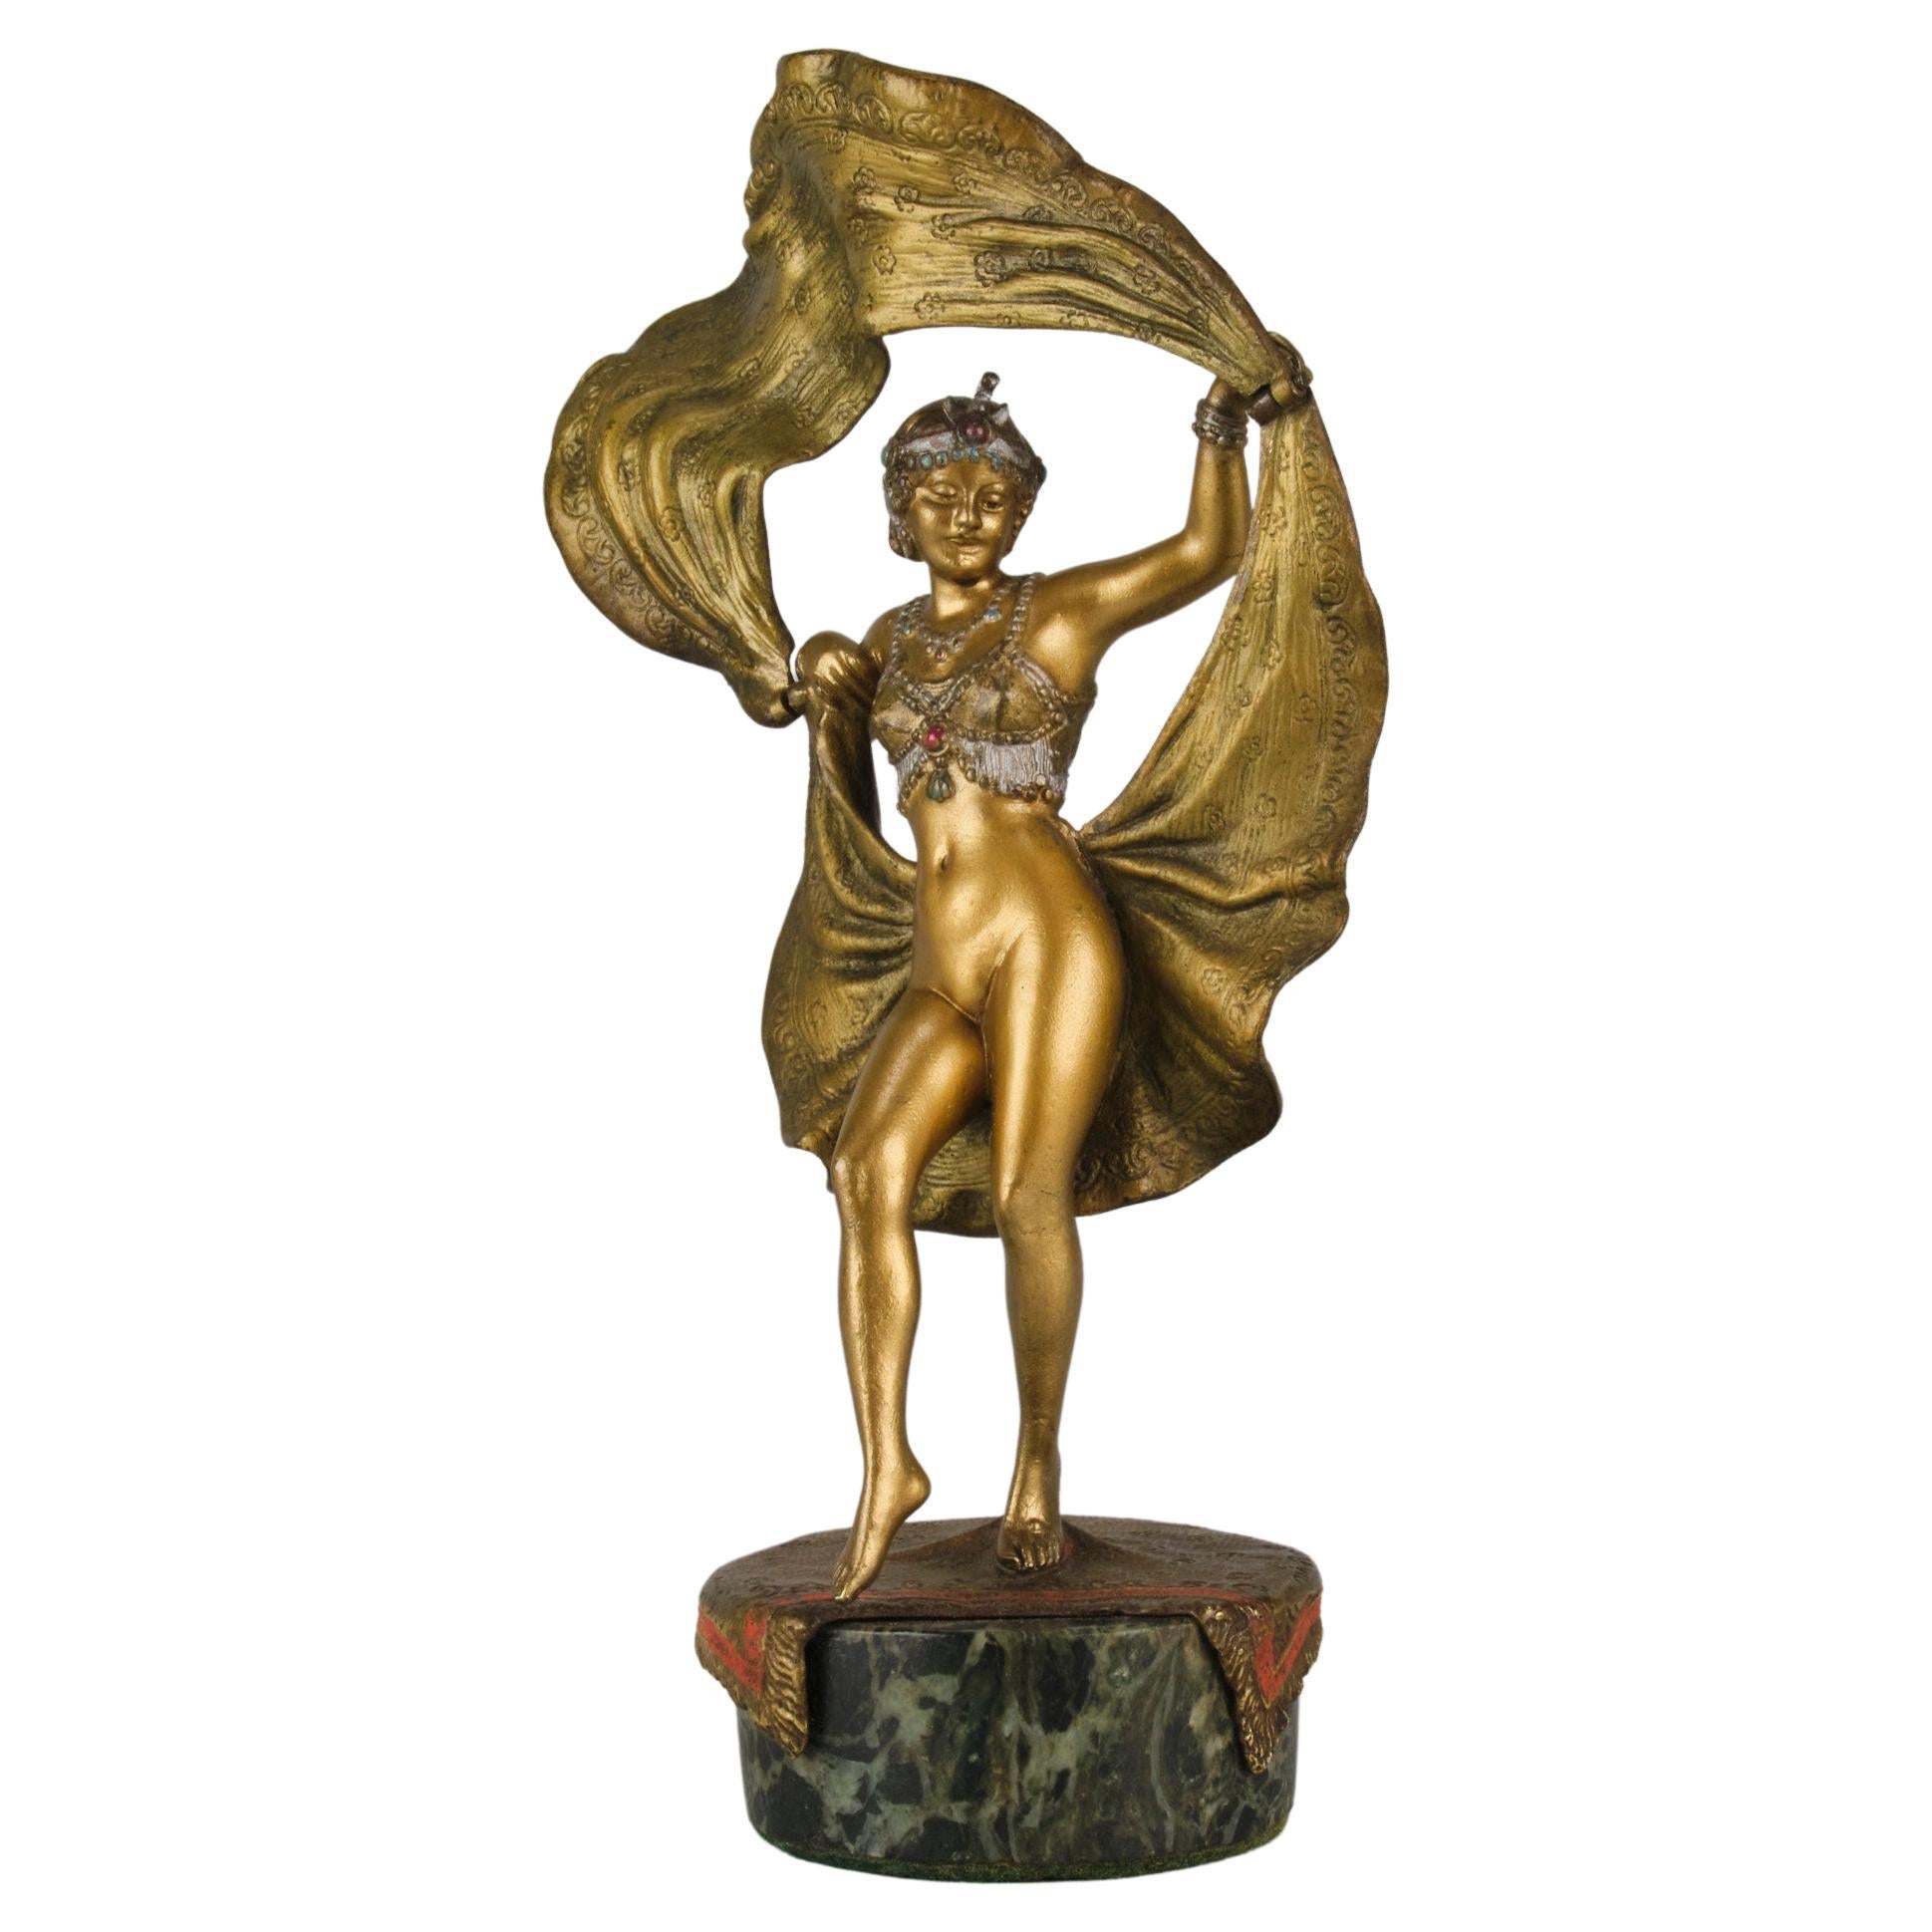 Early 20th Century Cold-Painted Bronze Entitled "Windy Day" by Franz Bergman